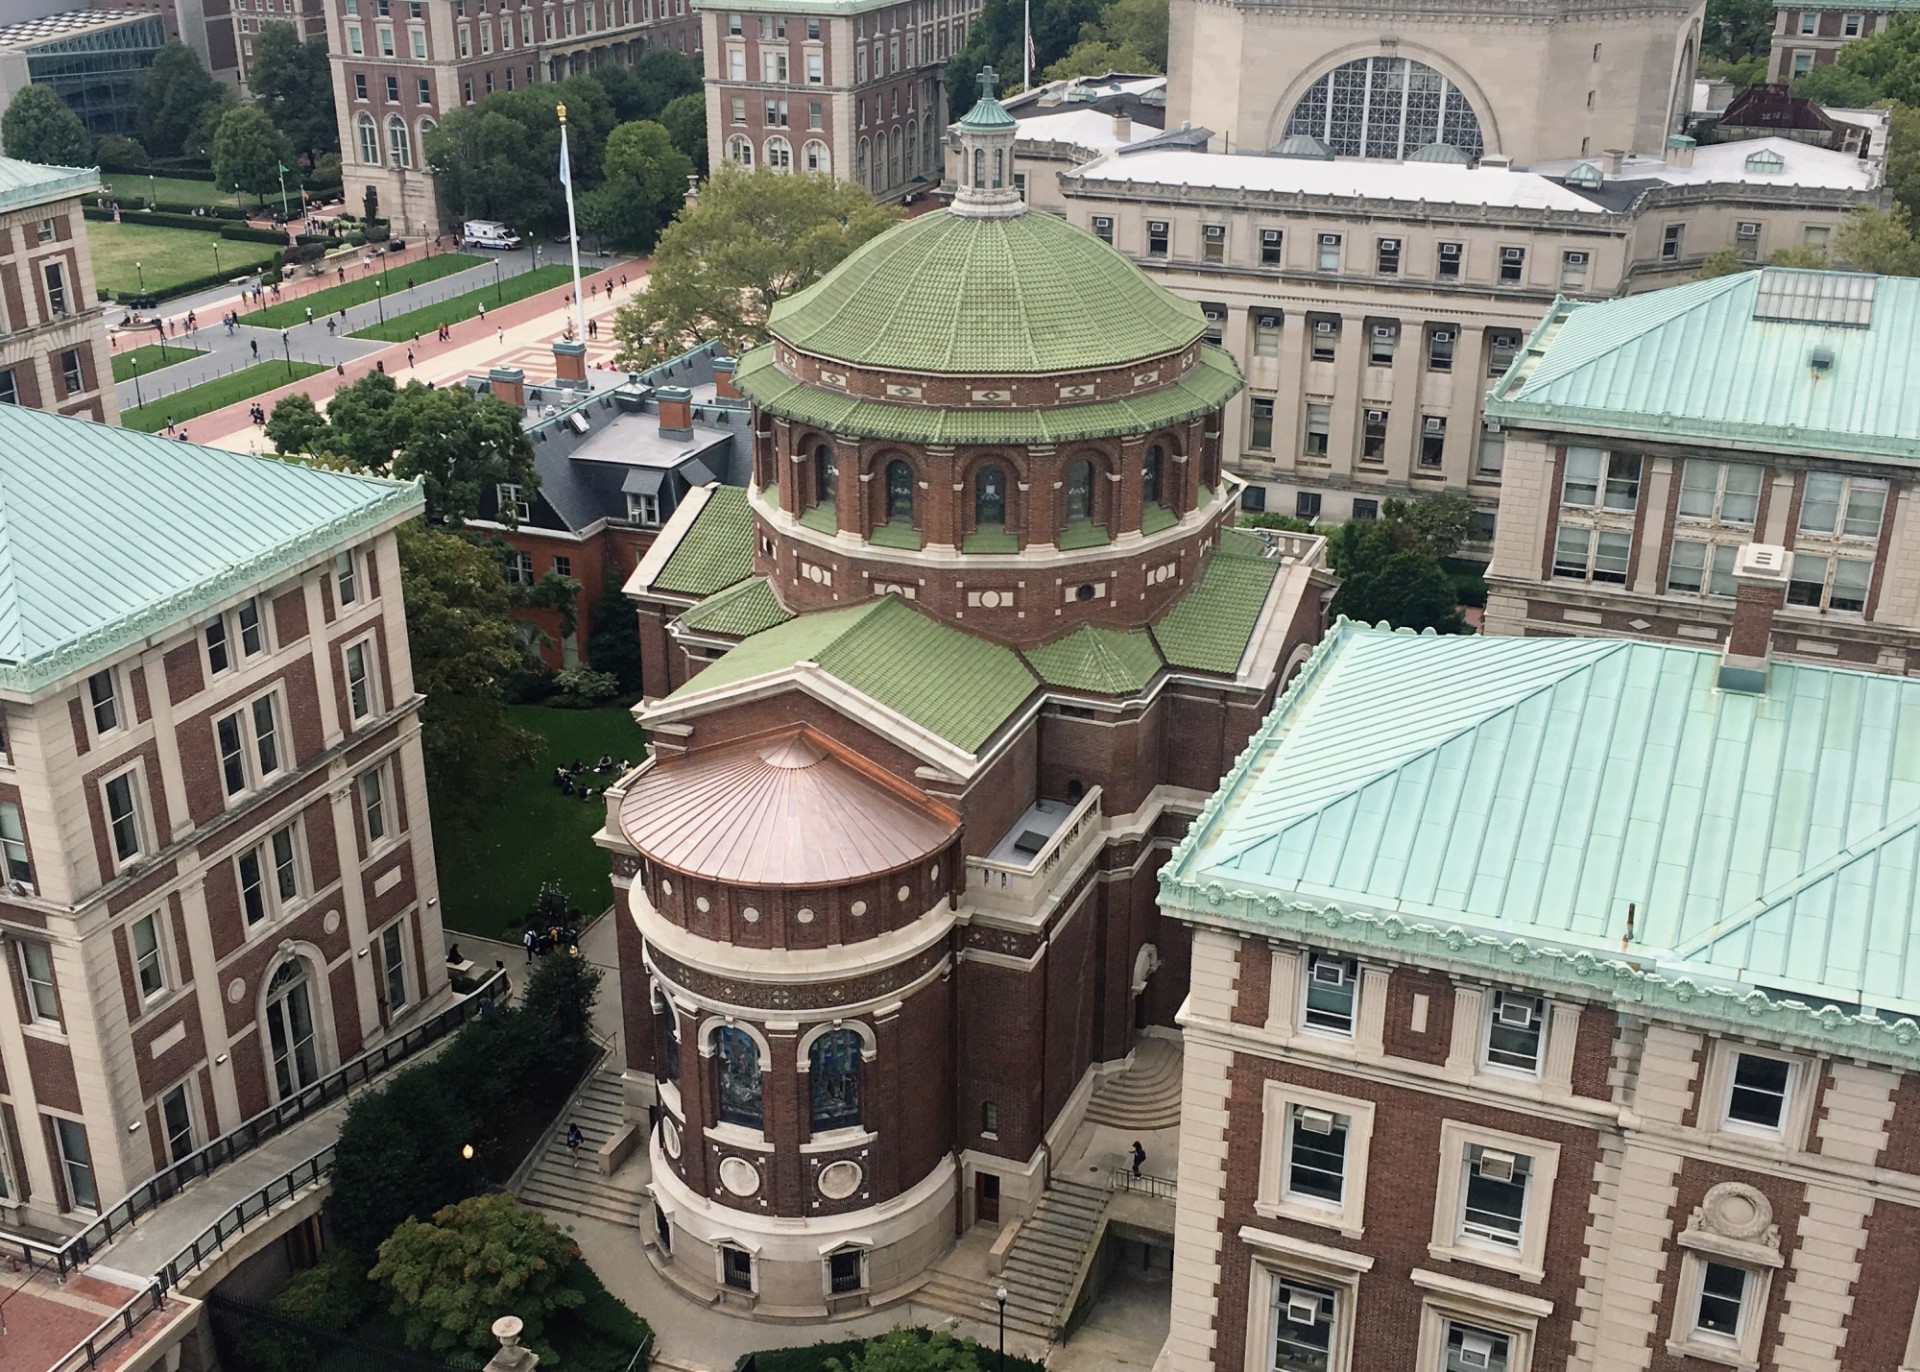 Aerial view of St. Paul's Chapel, a brick building with a green terra cotta roof.